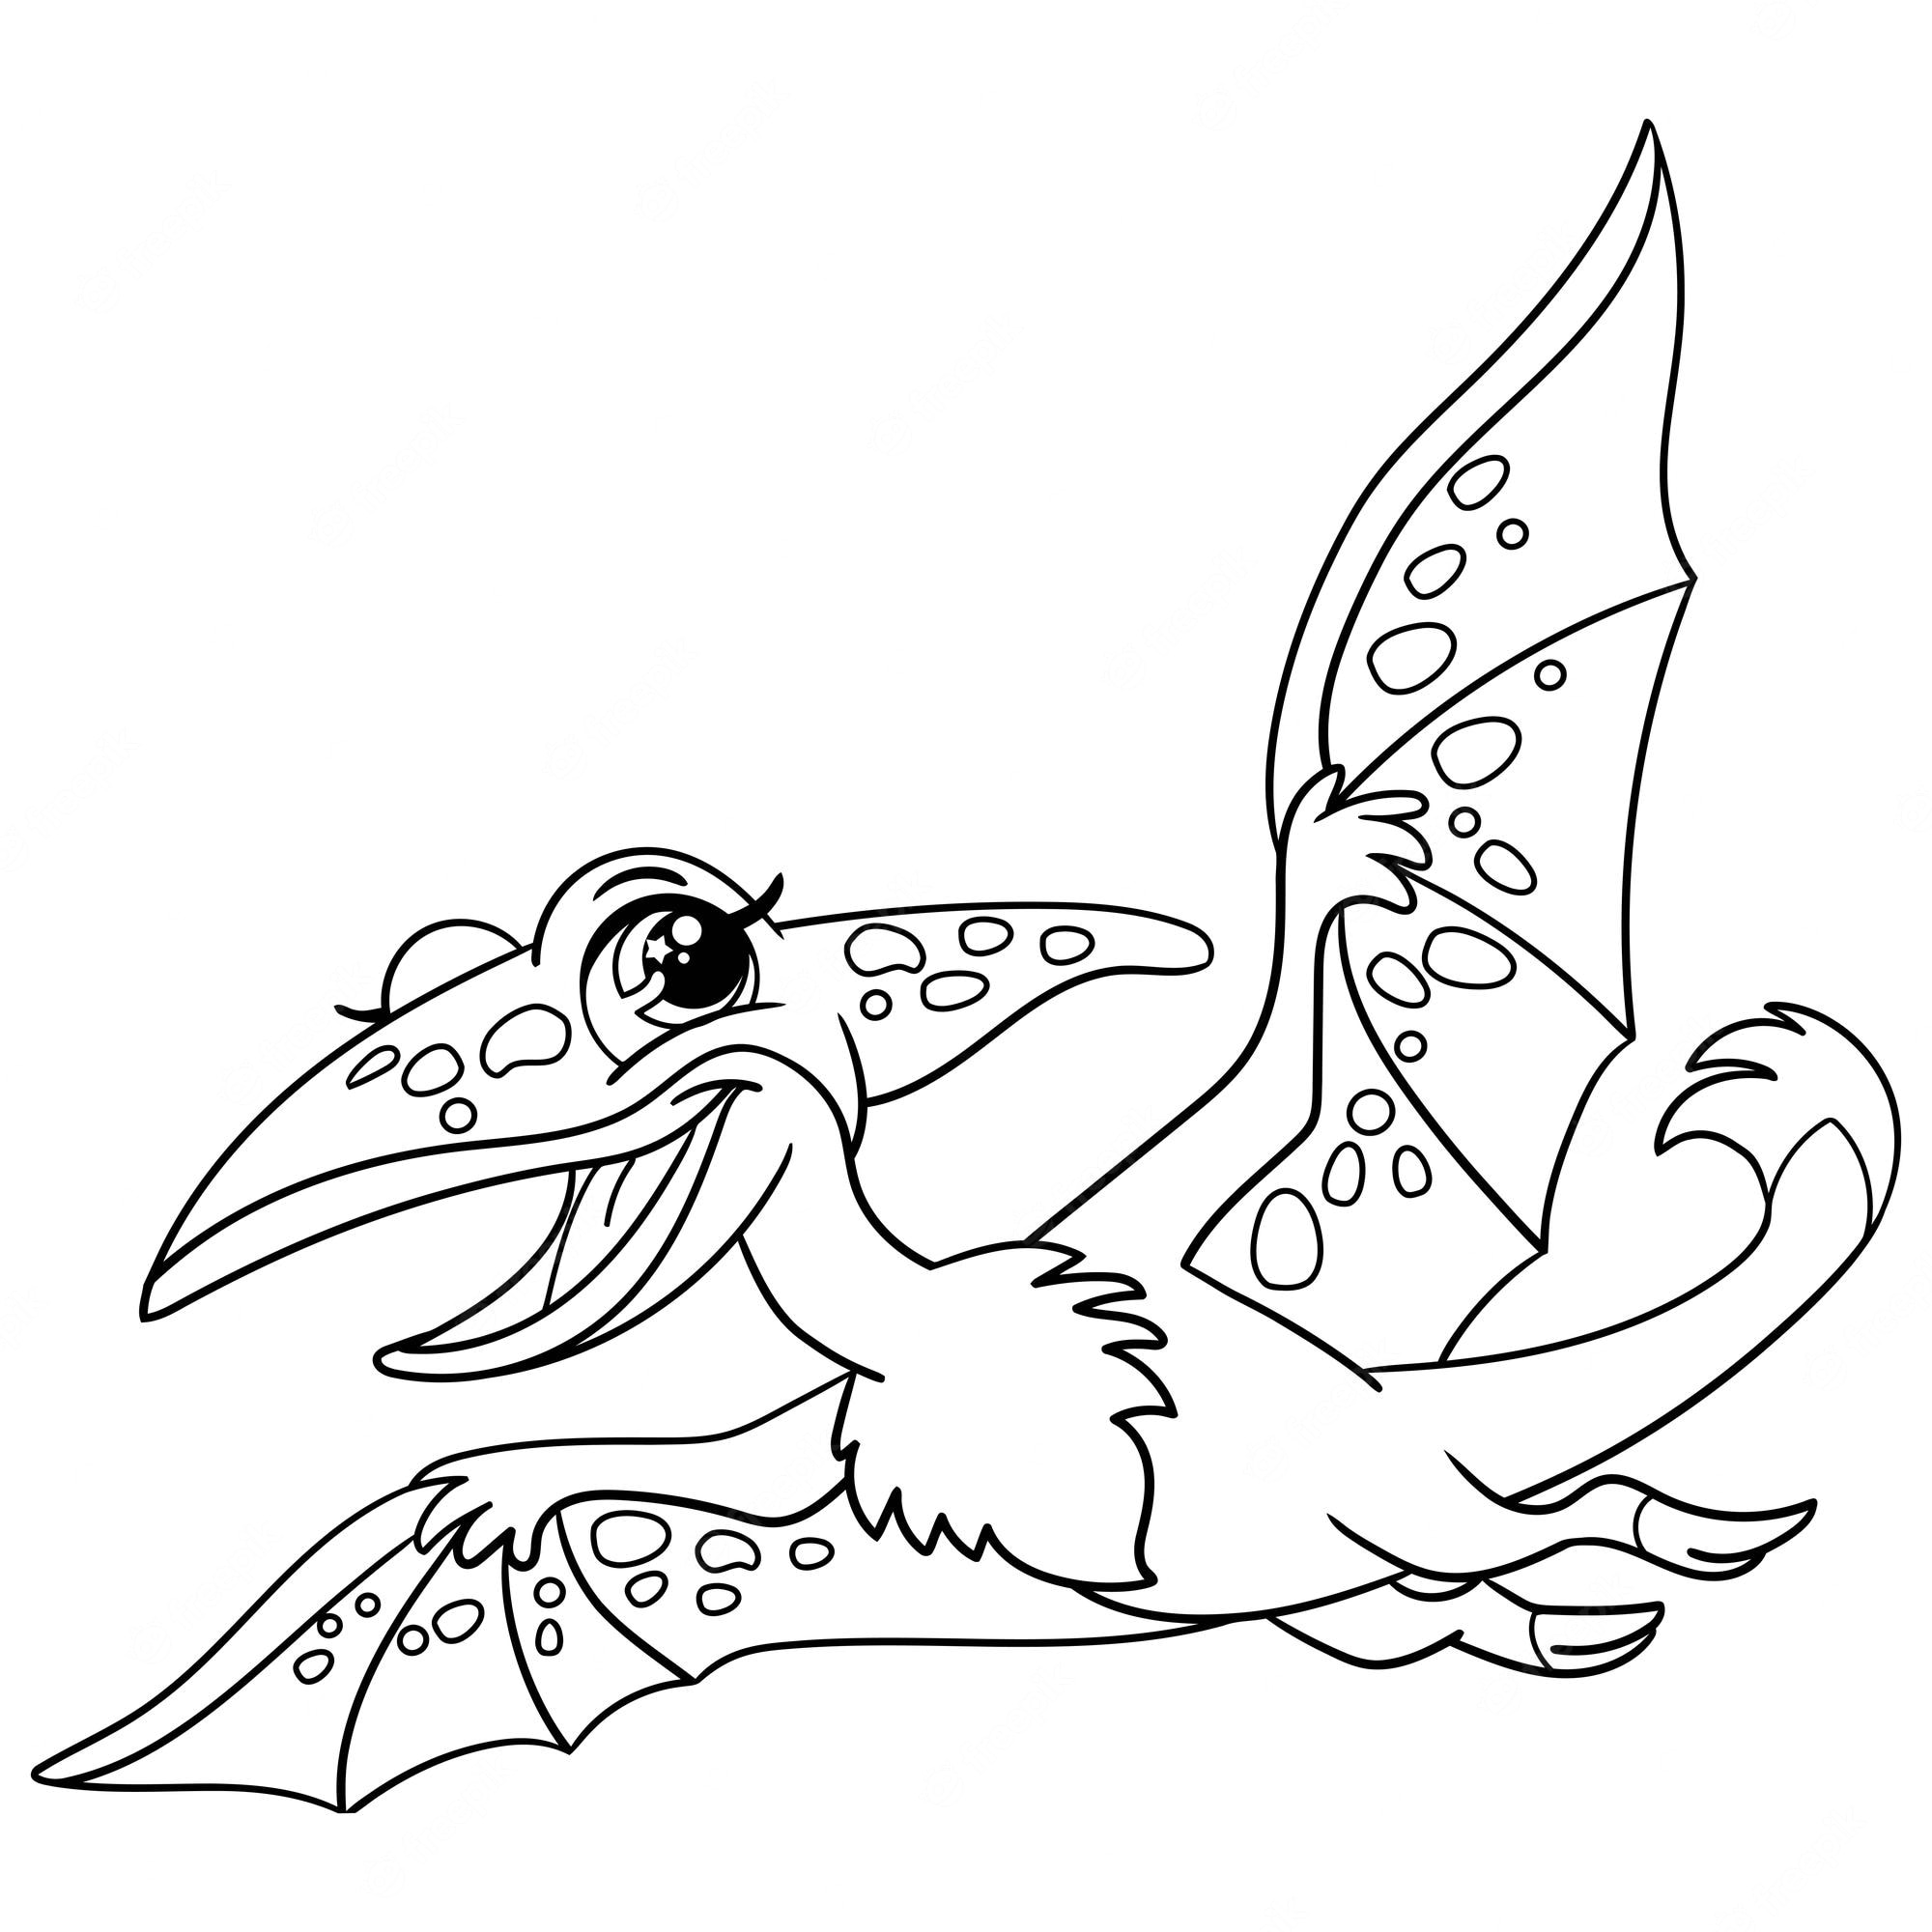 Premium Vector | Pterodactyl dinosaur coloring page for kids